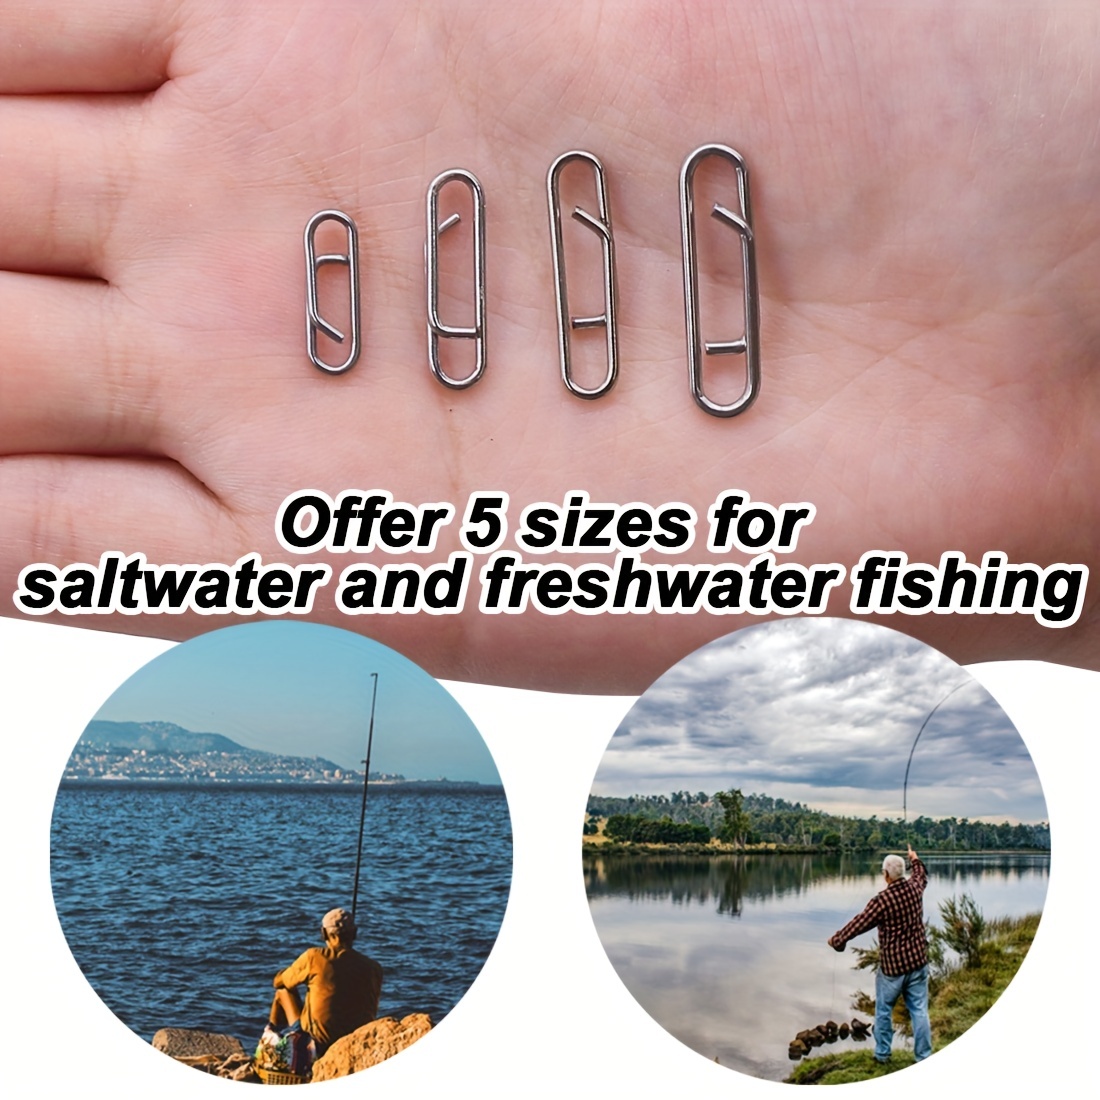 200pcs Fishing Clips, Stainless Steel Clip, Quick Change And Fast Link,  Fishing Snap Connector, Fishing Tackle For Freshwater Saltwater